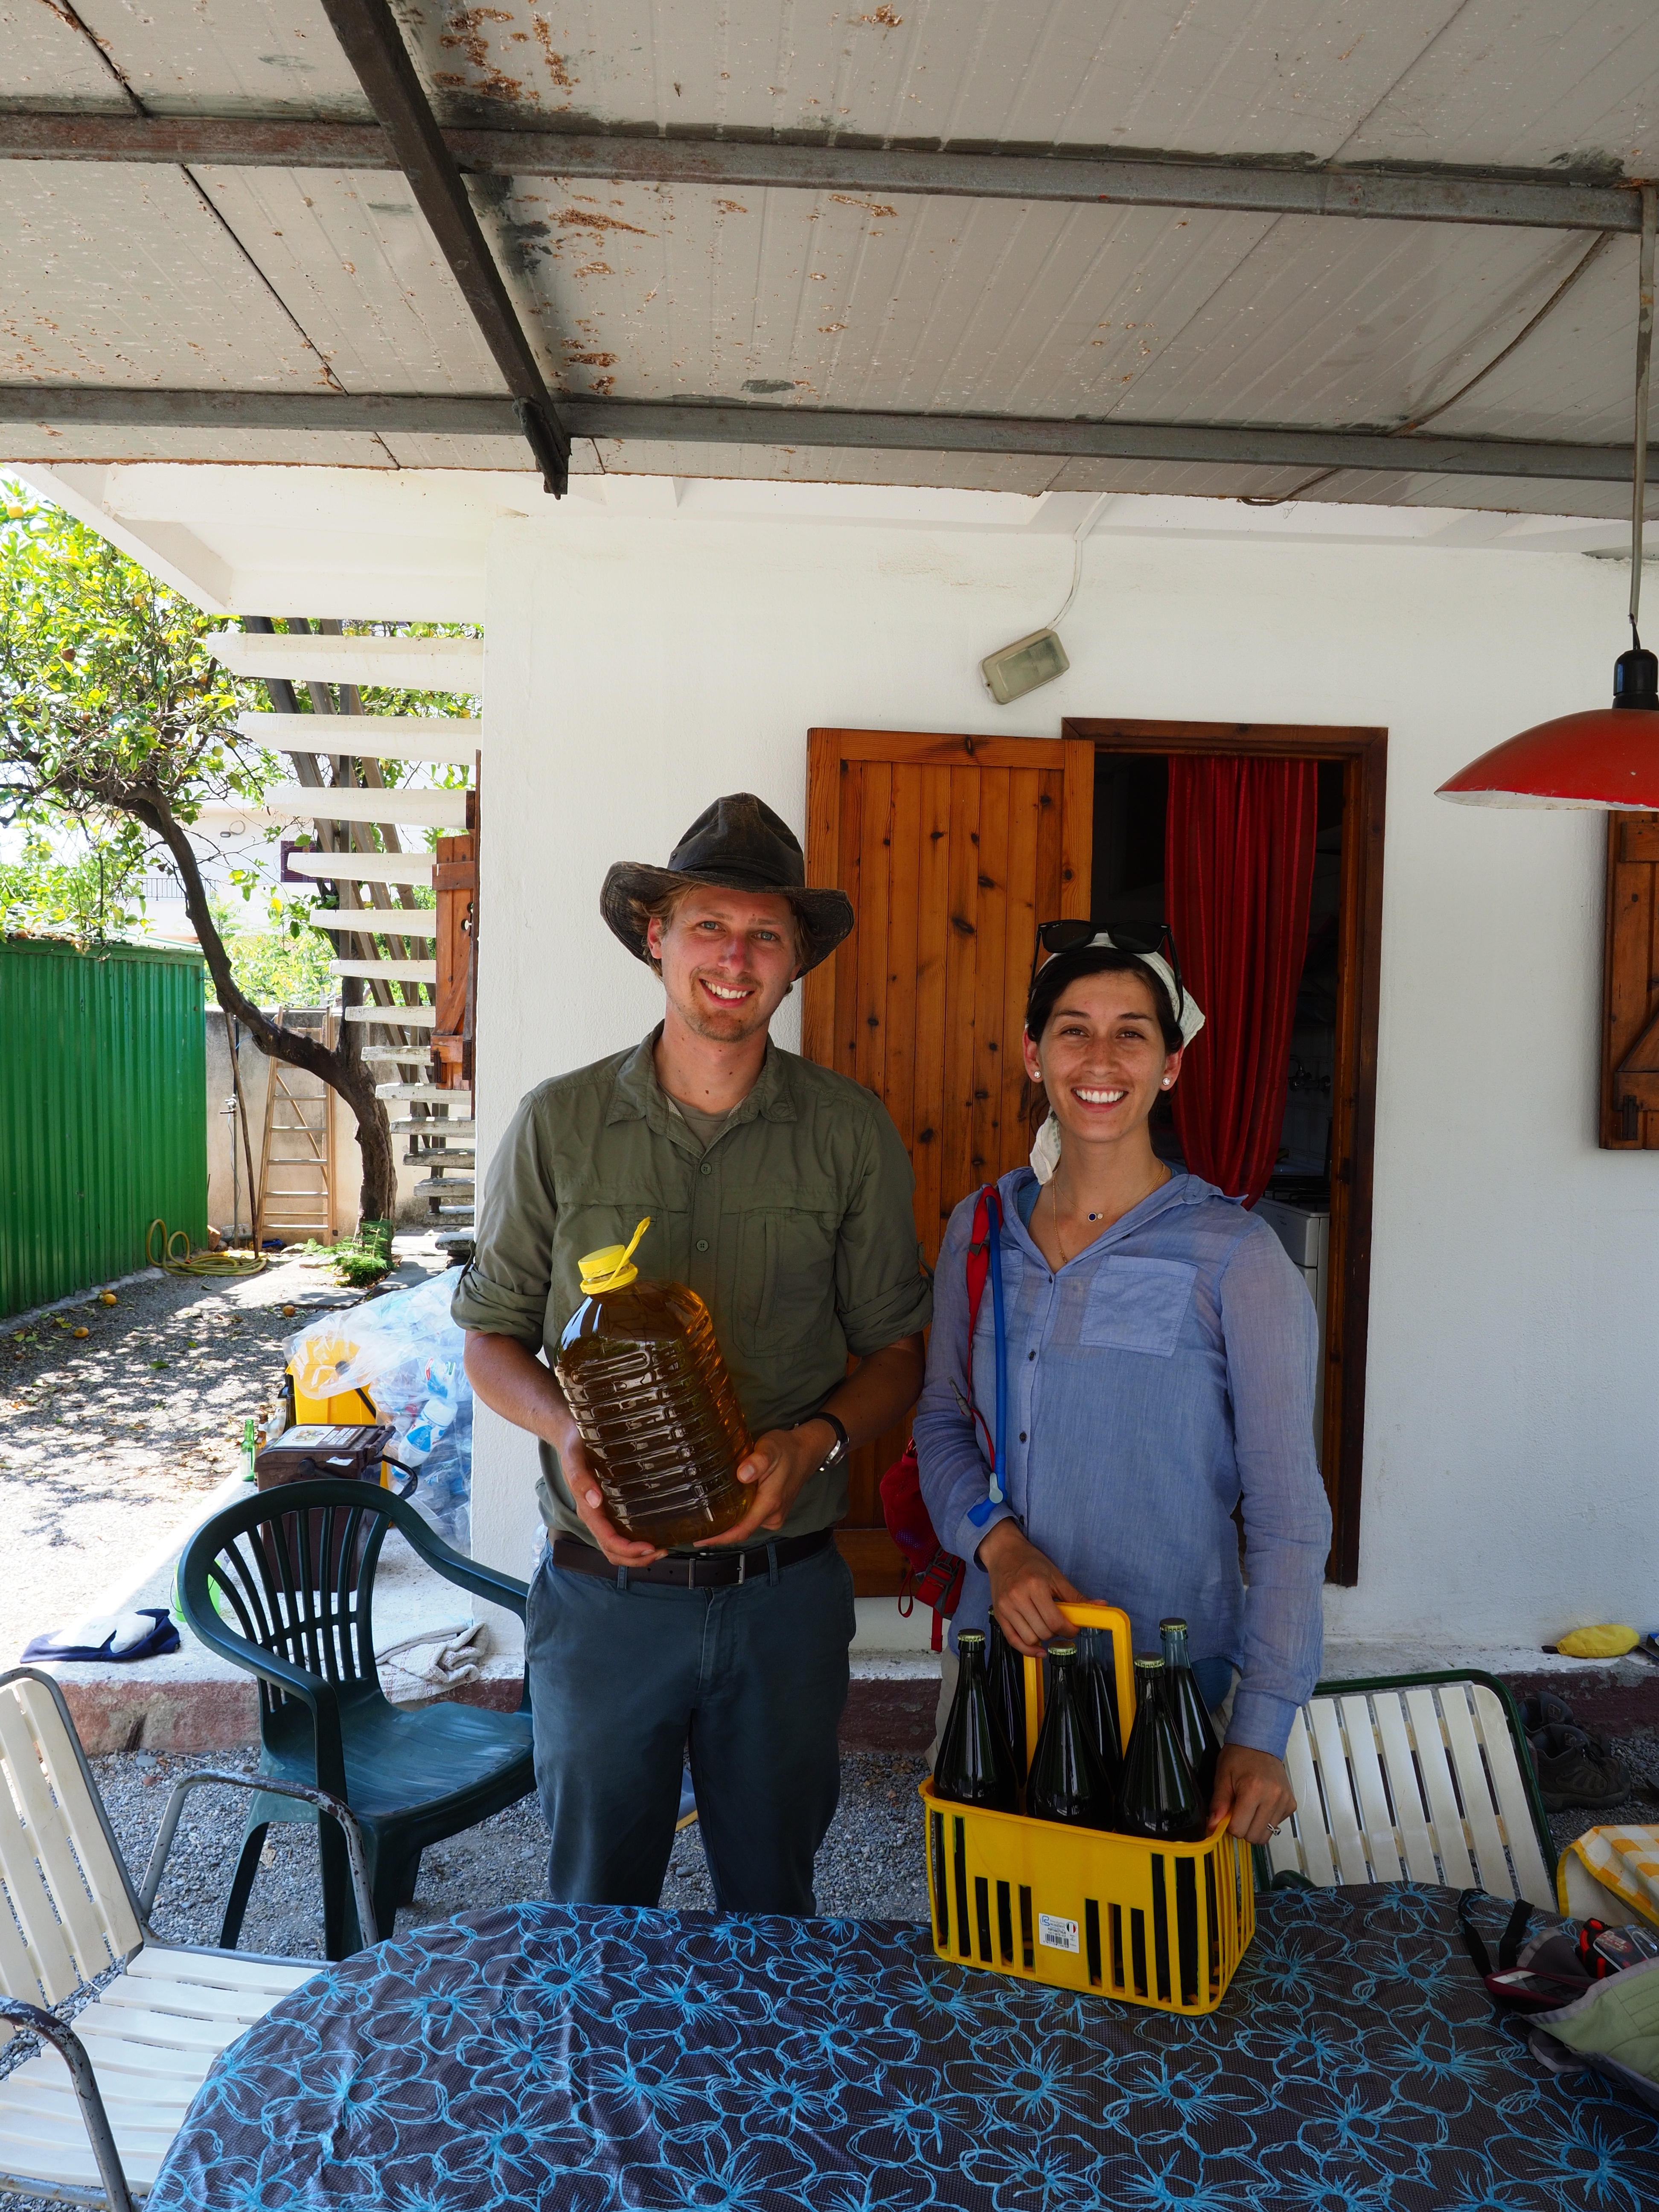 SDSU MA student Yesenia Garcia (left) and University of Notre Dame PhD student Nicholas Ames (right), demonstrate some of the perks of a community-engaged approach to archaeology in Calbaria, Italy!